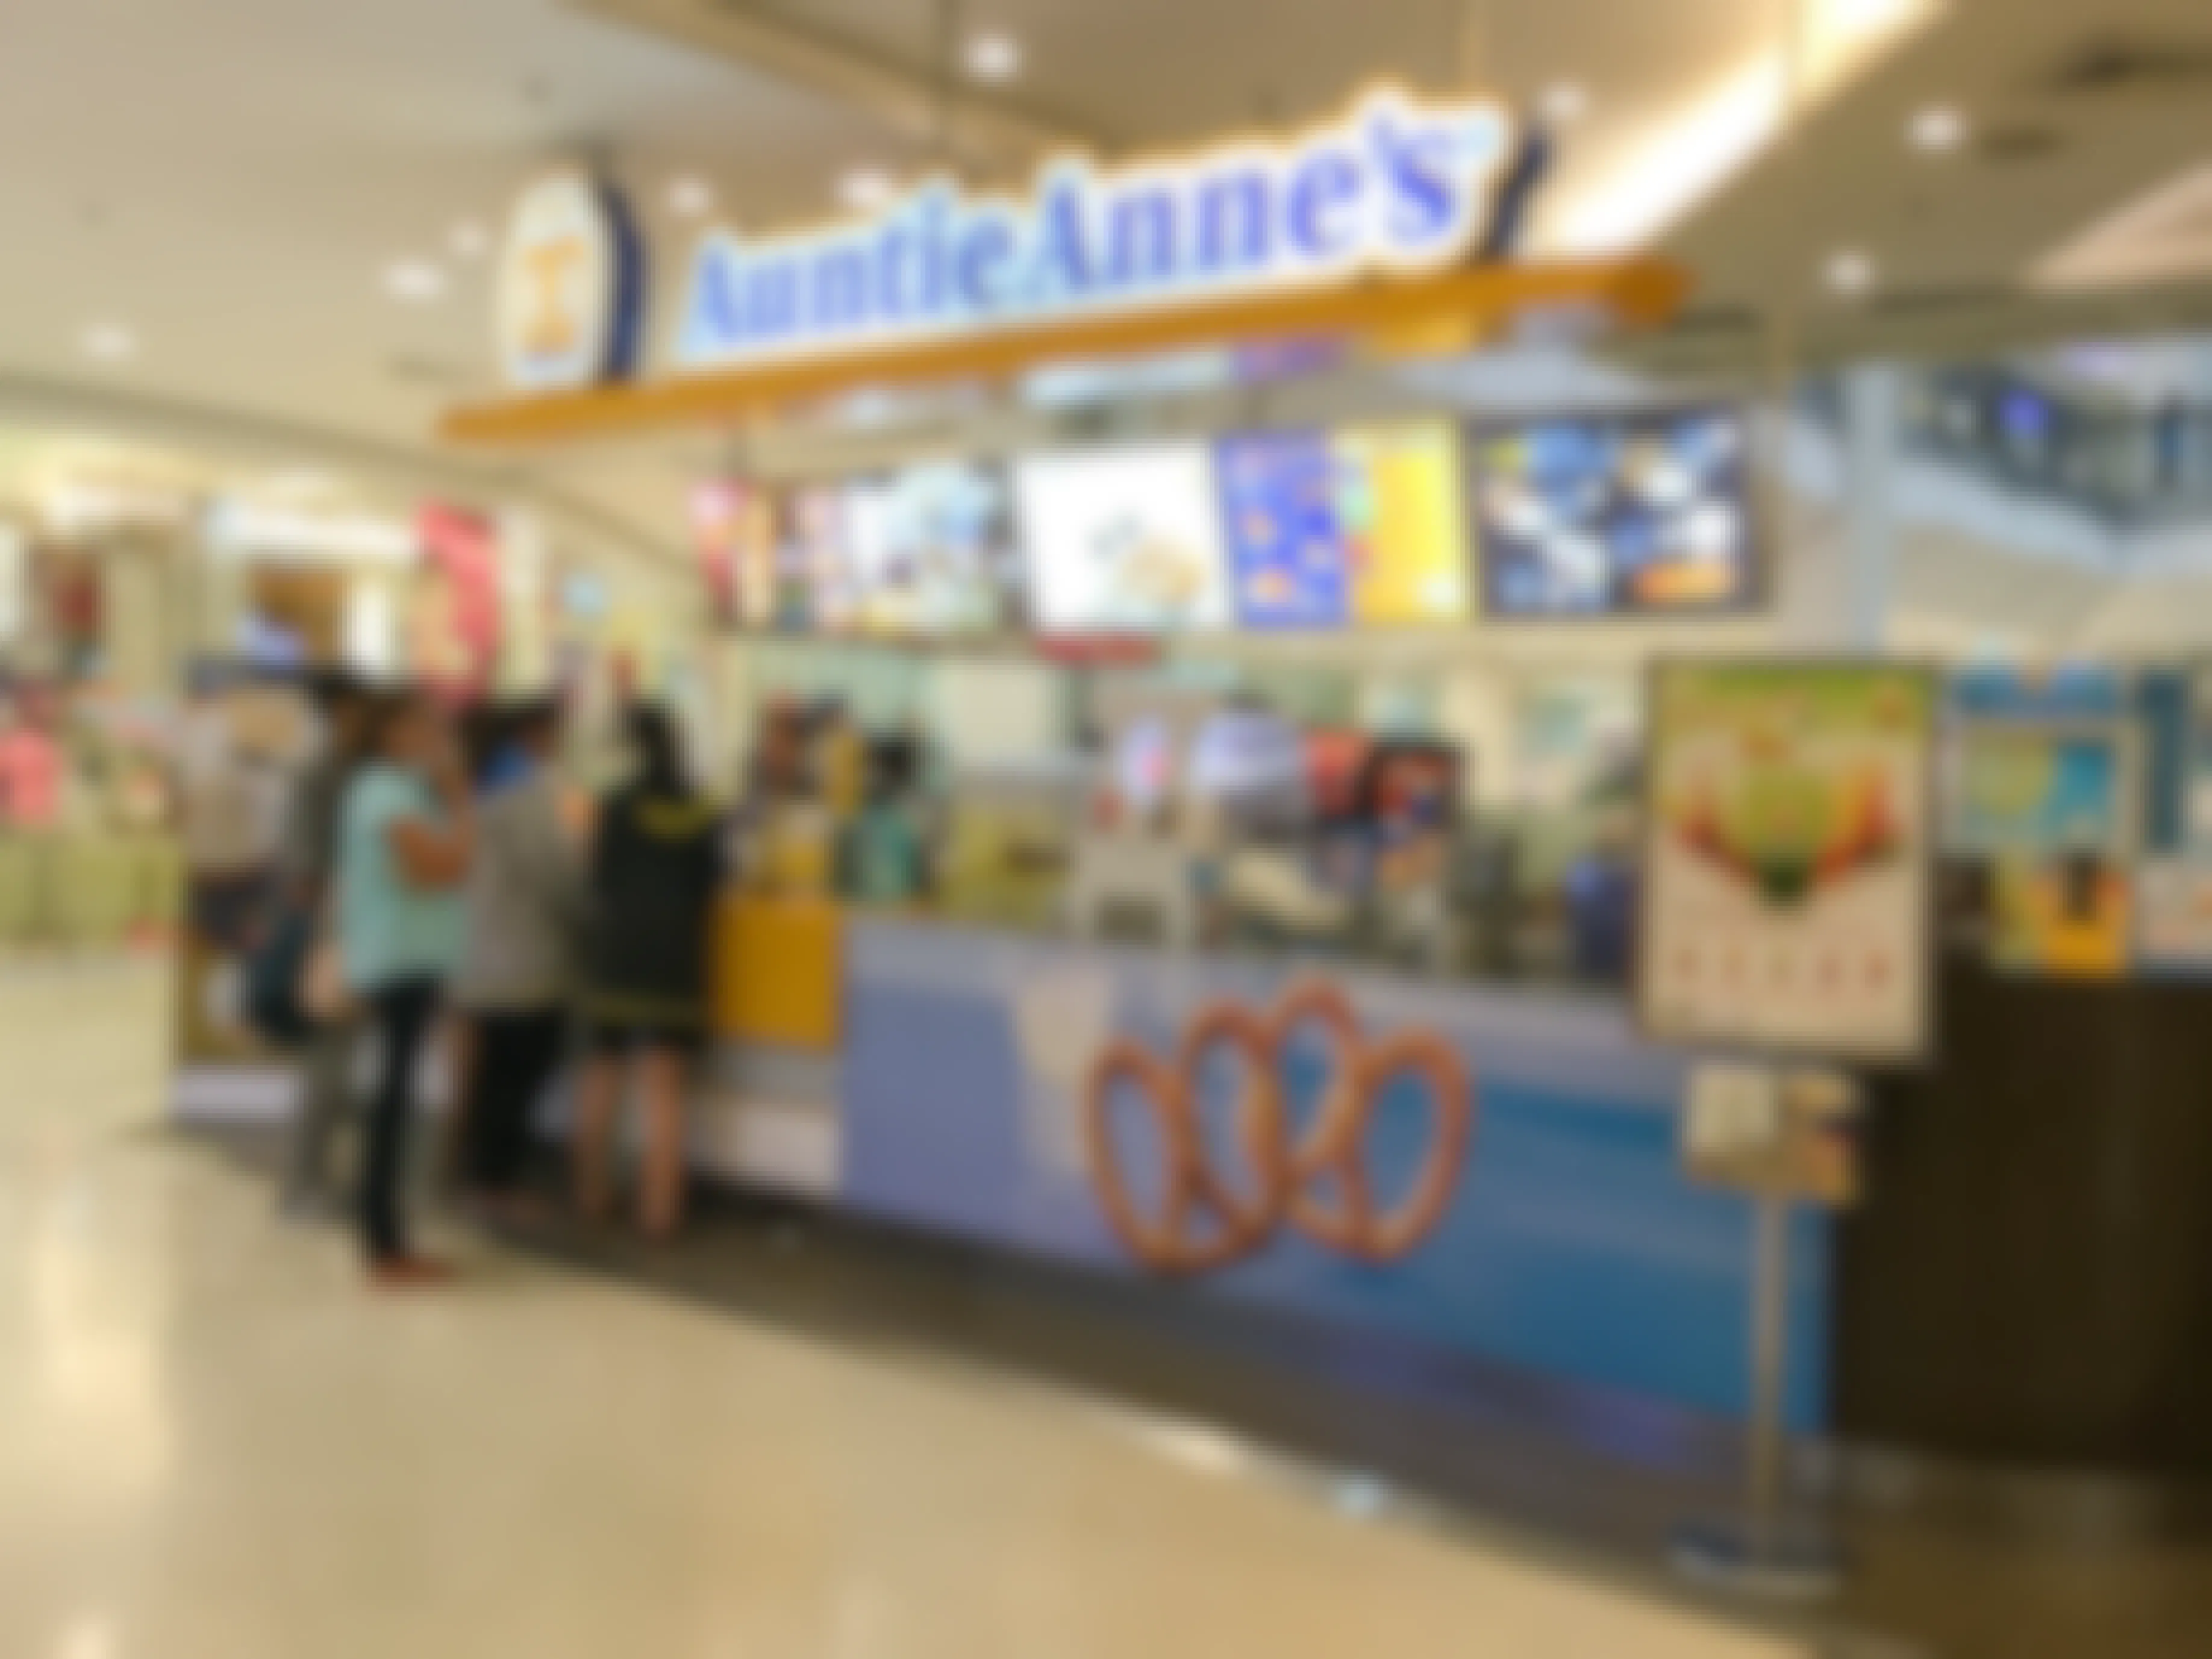 A group of people standing at an Auntie Anne's counter inside a mall.